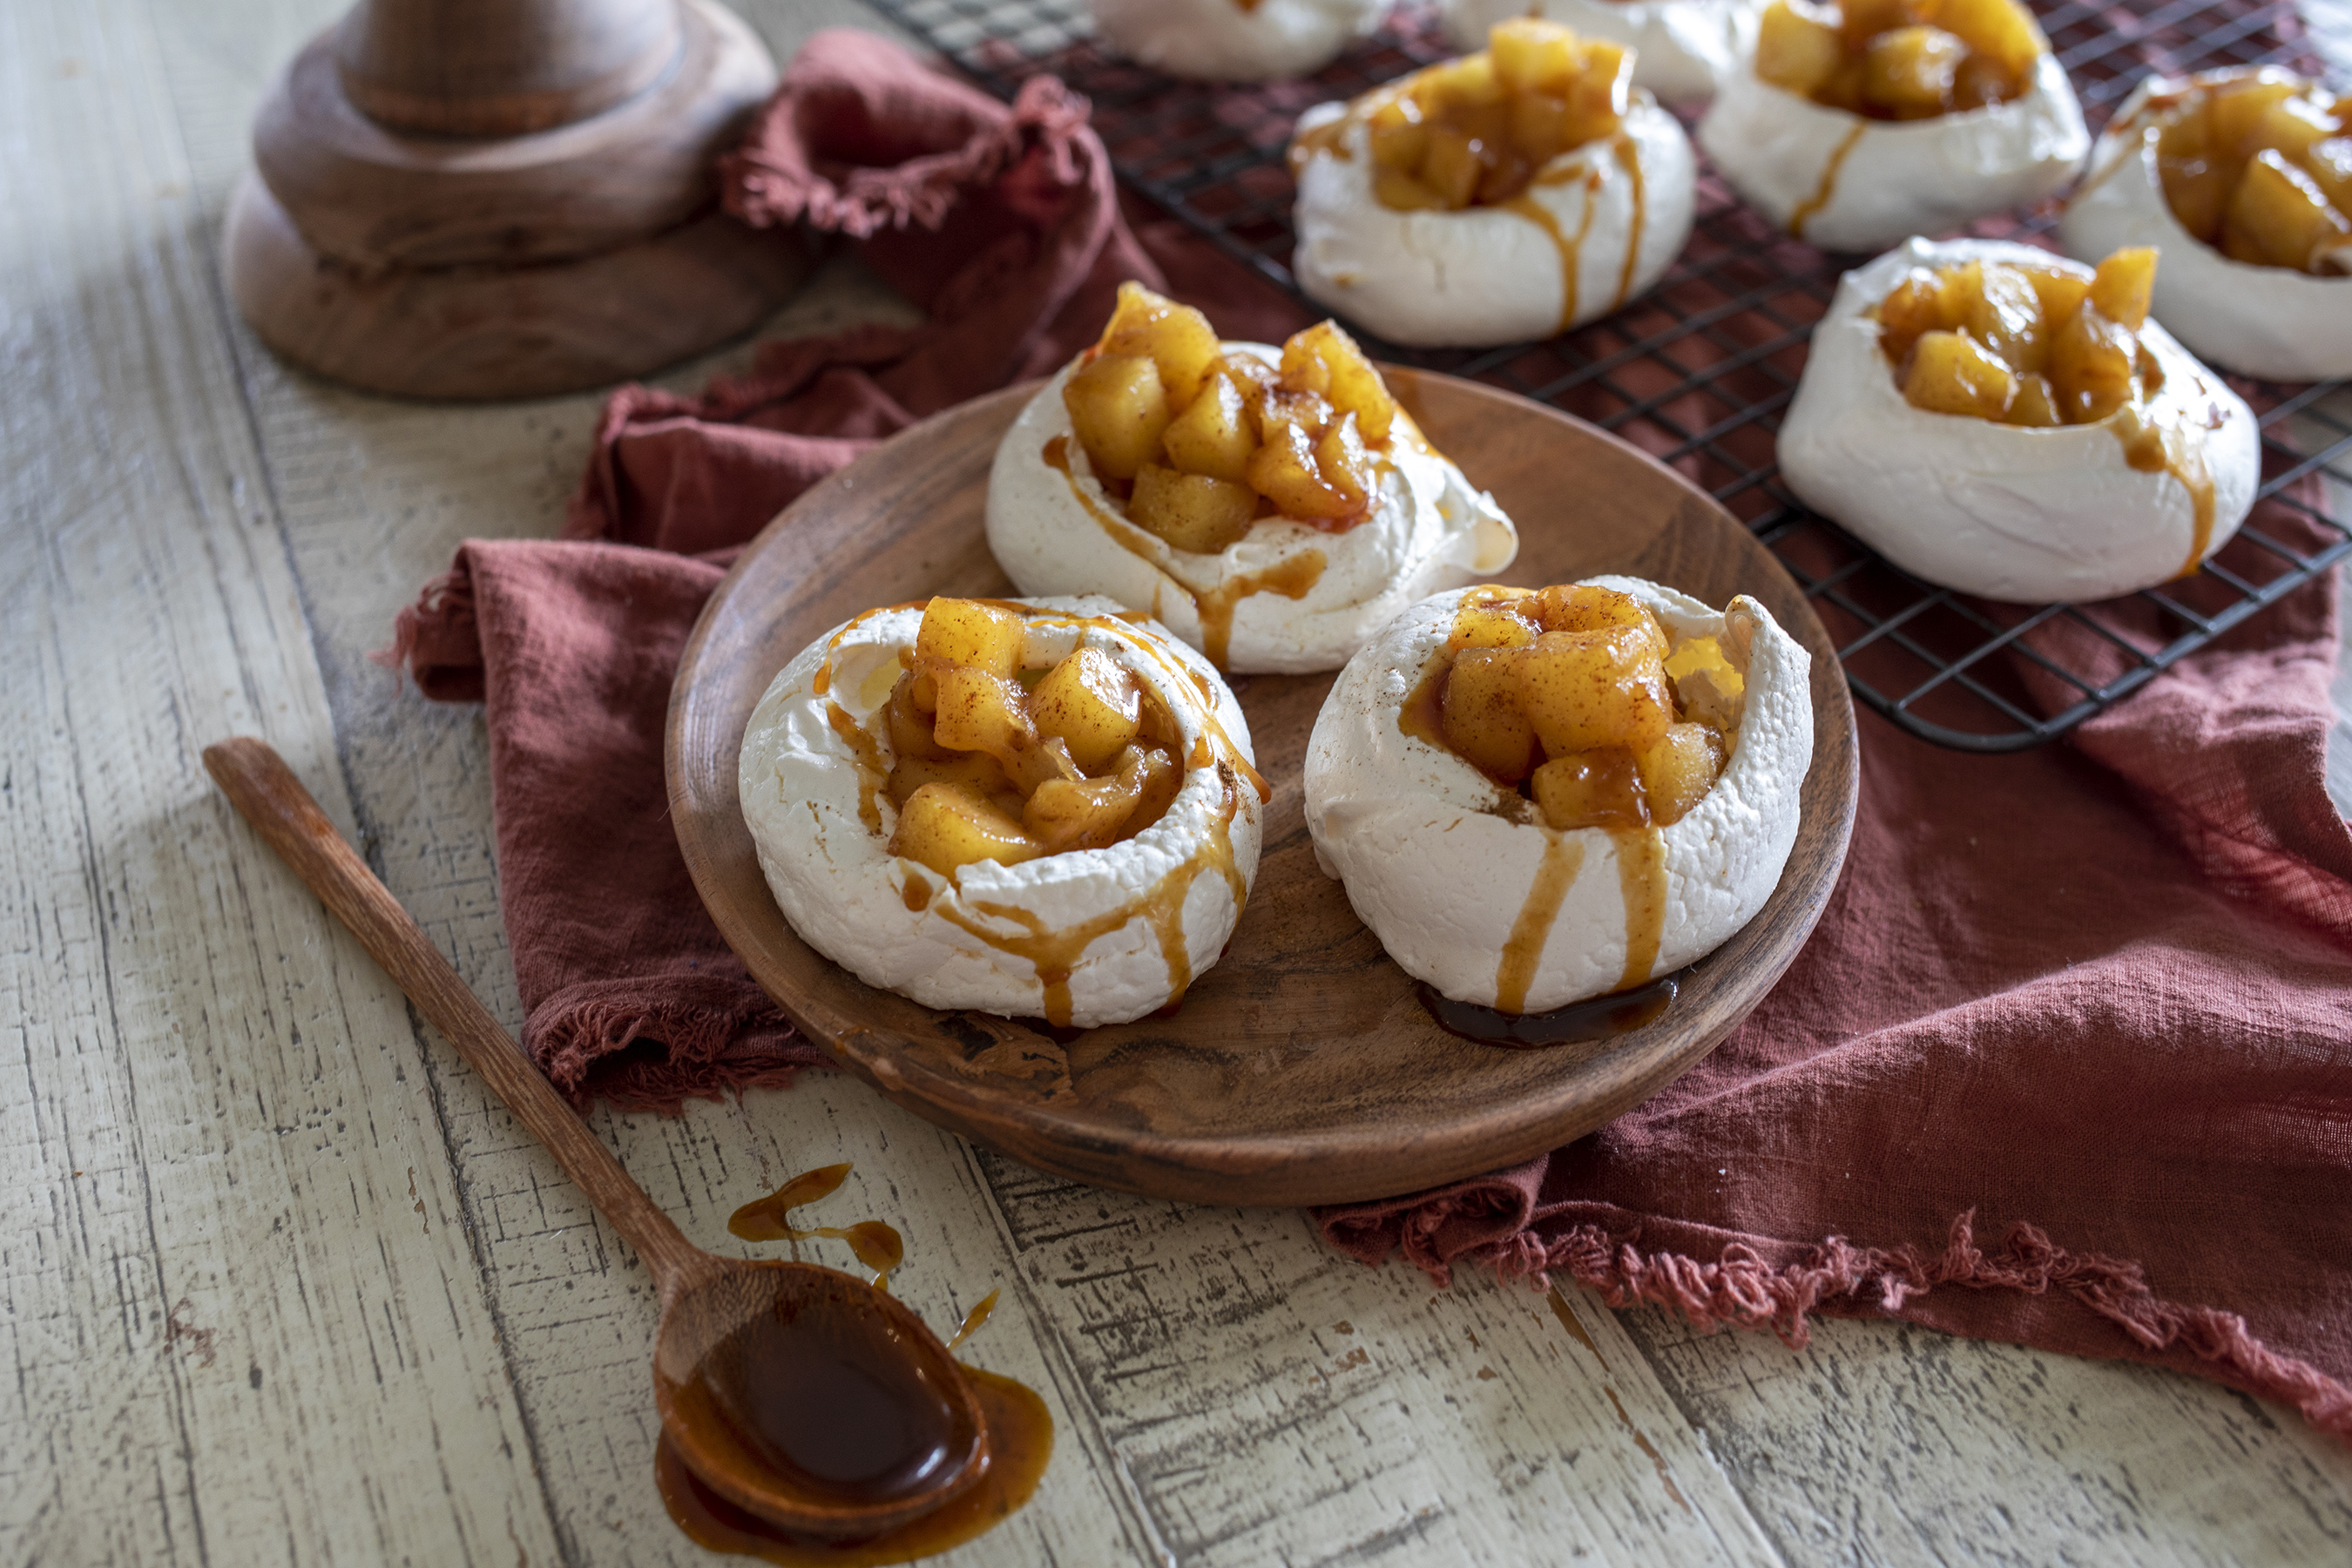 These meringues aren't just delicious - they're a great rainy day activity for the entire family.